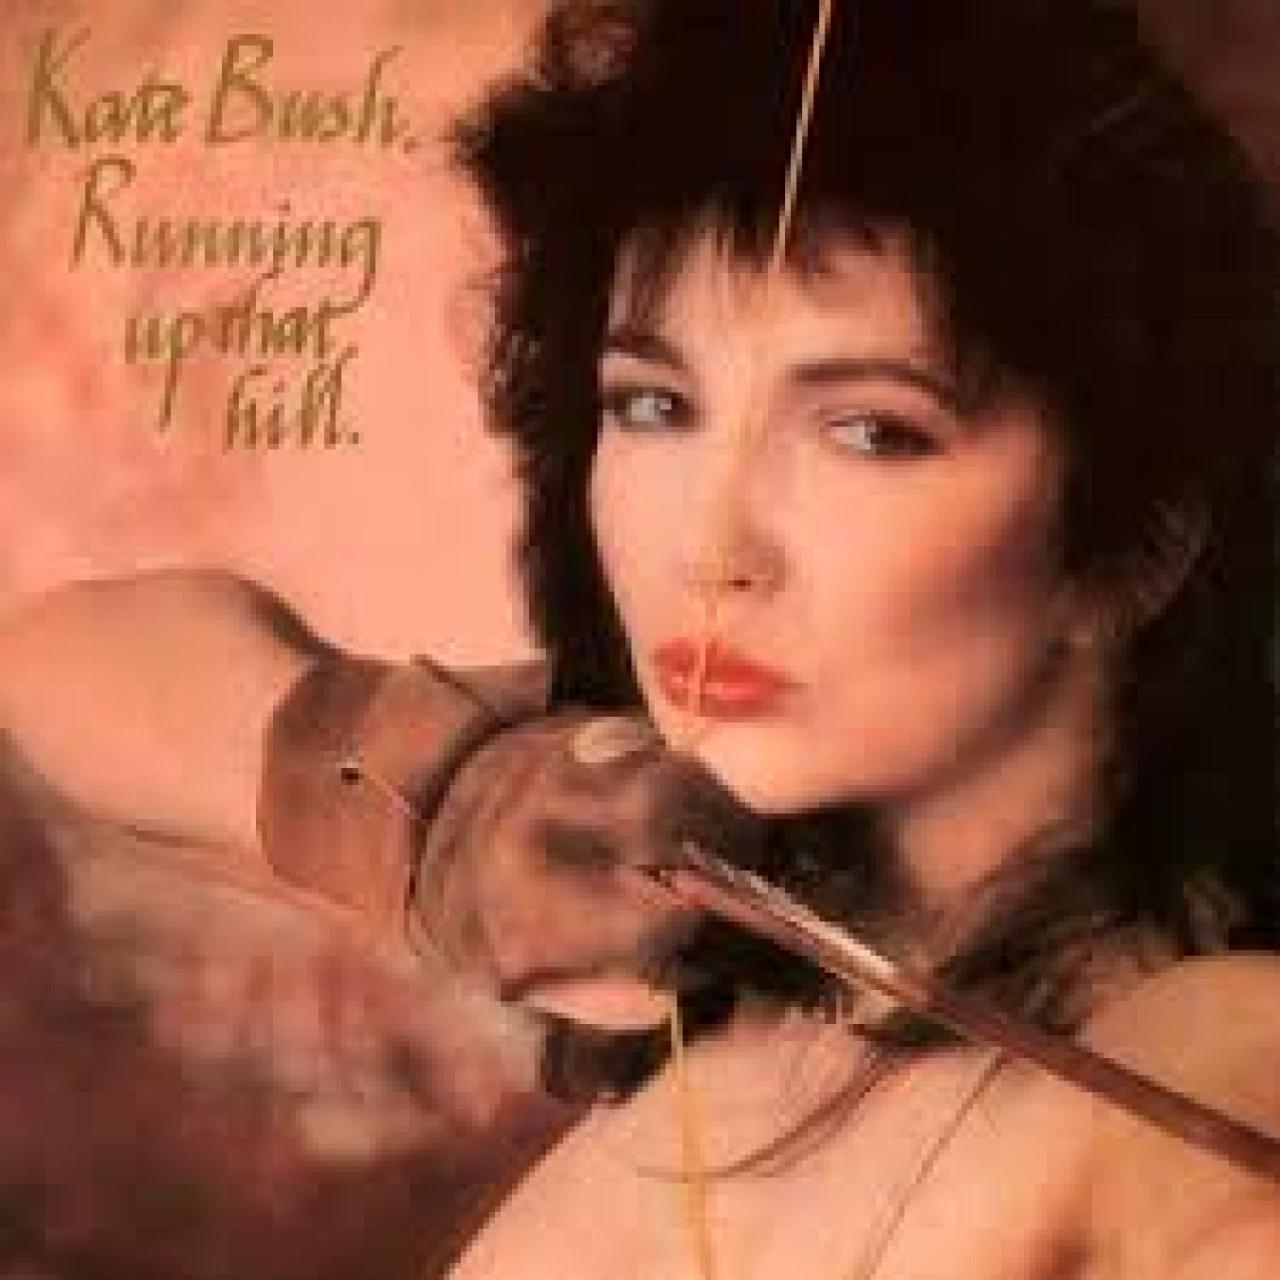 Kate Bush – Running Up That Hill MP3 Download